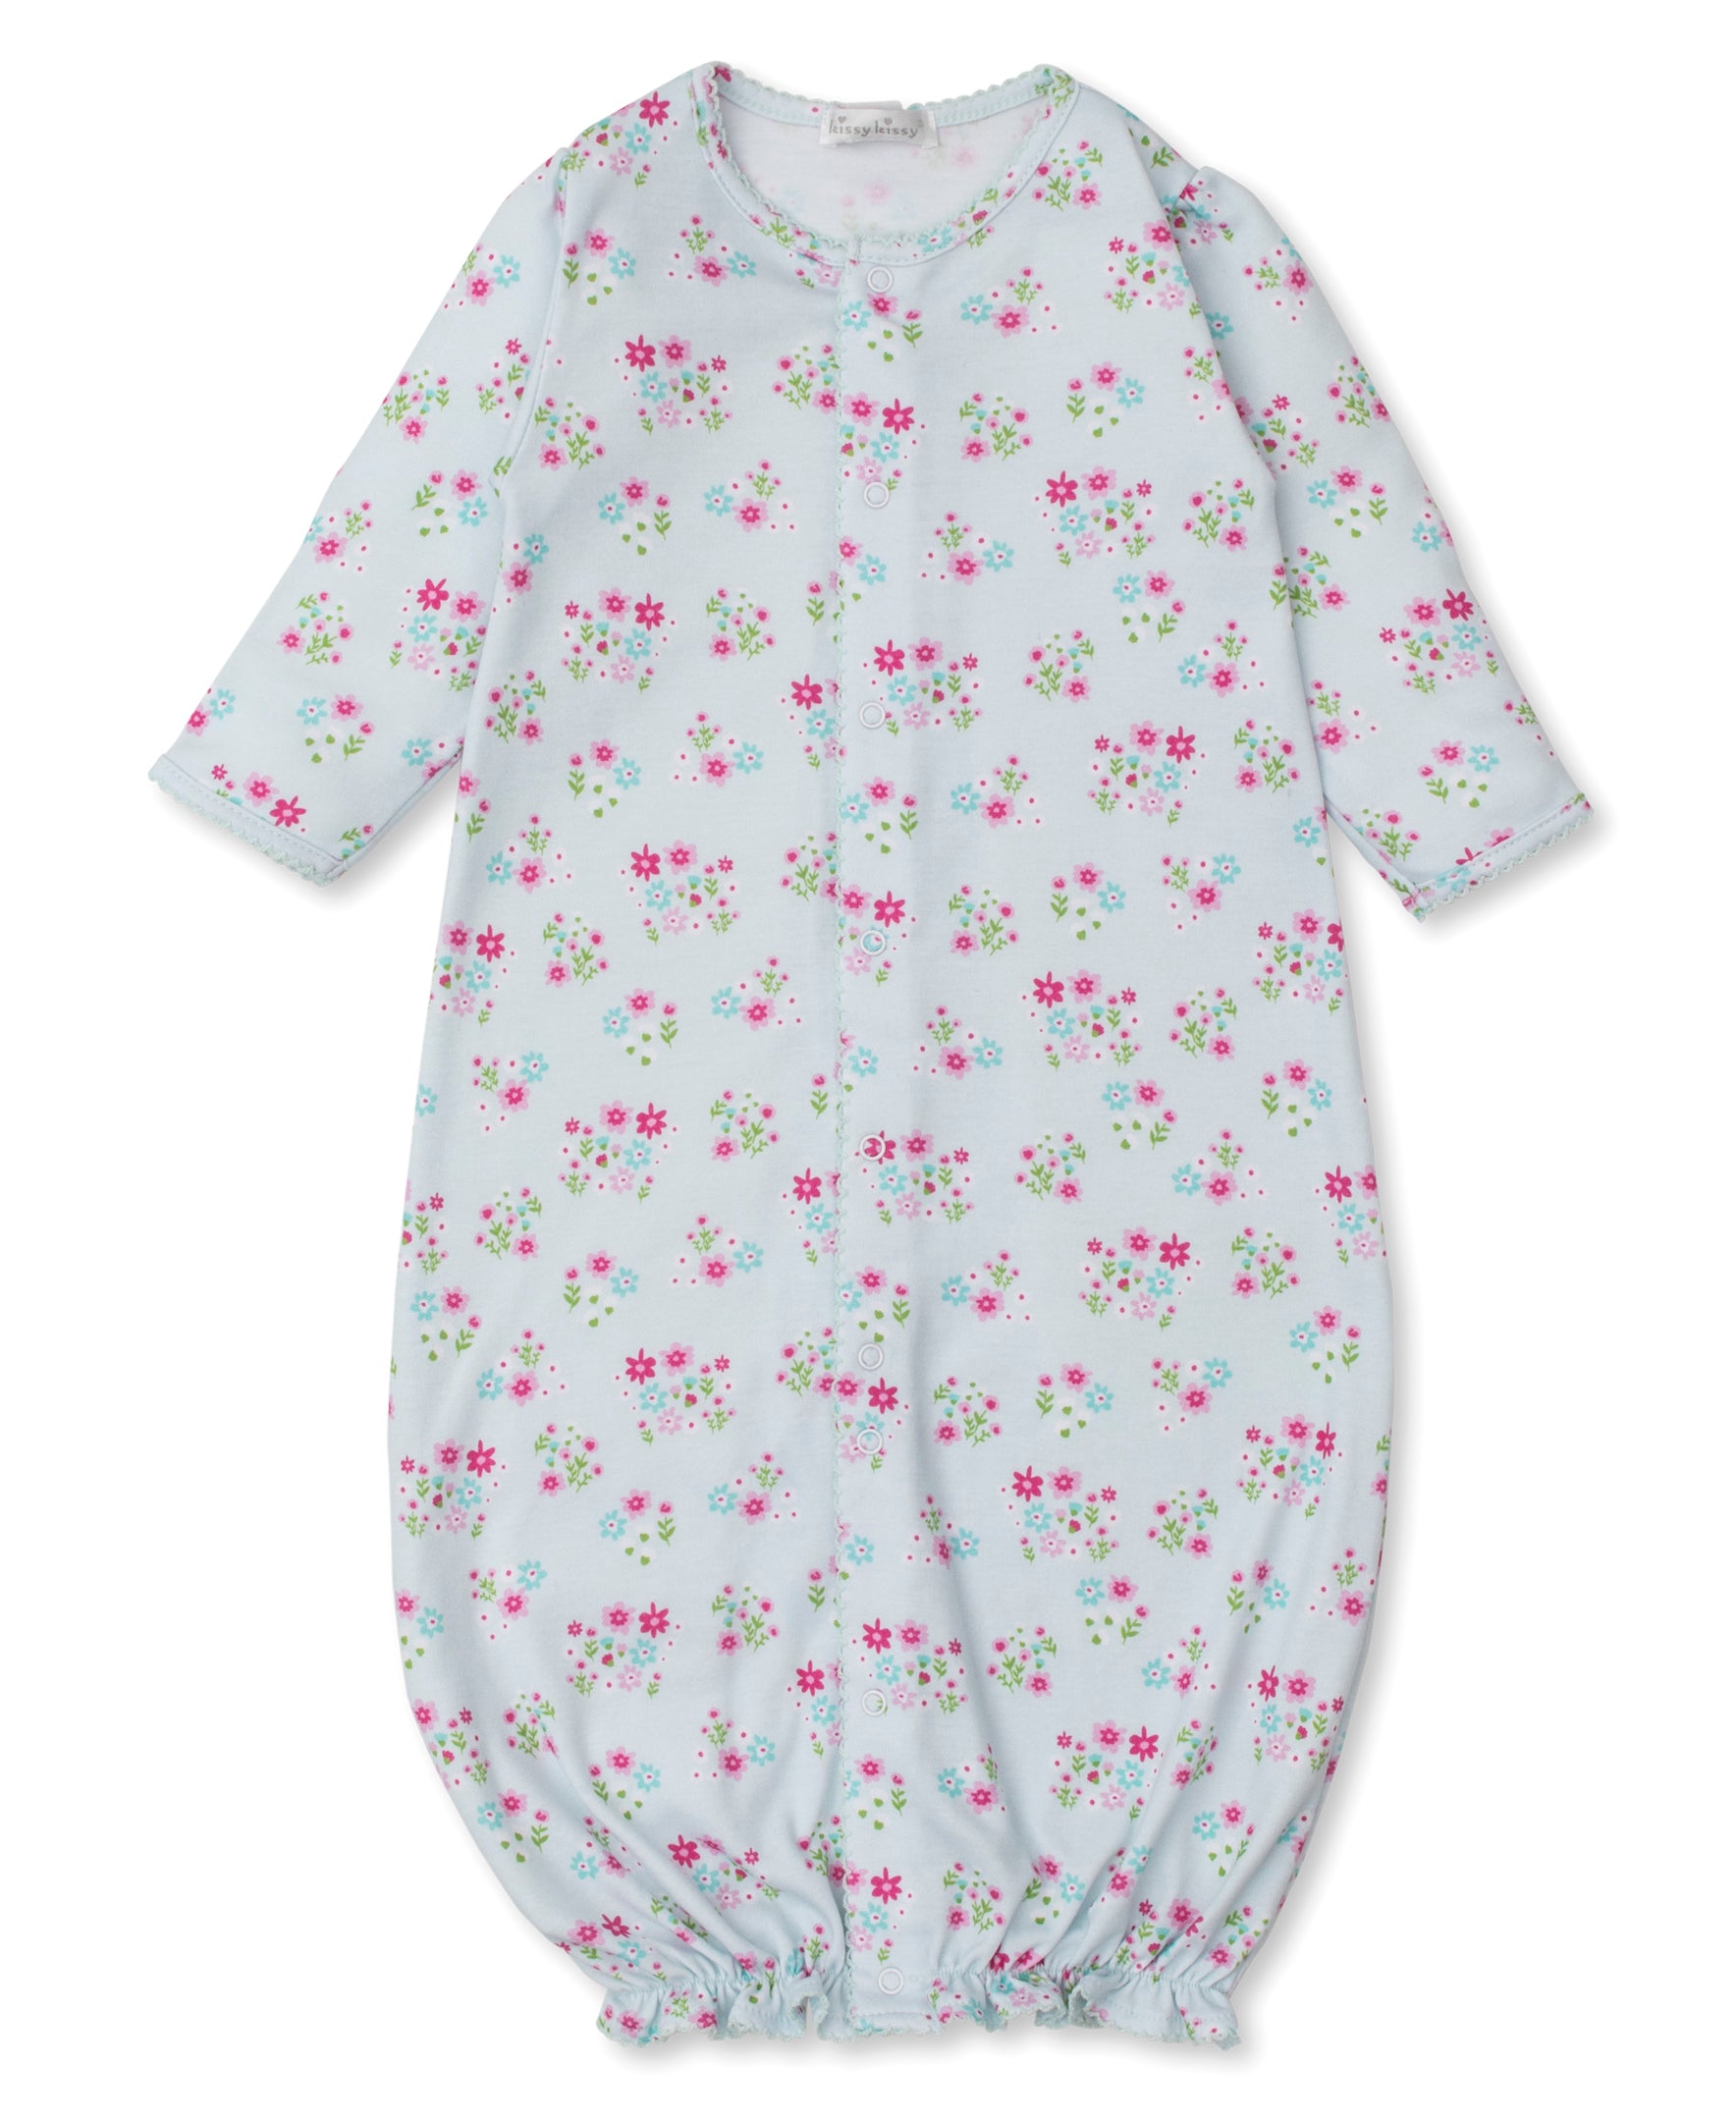 Bunny Blossoms Floral Convertible Gown - Kissy Kissy